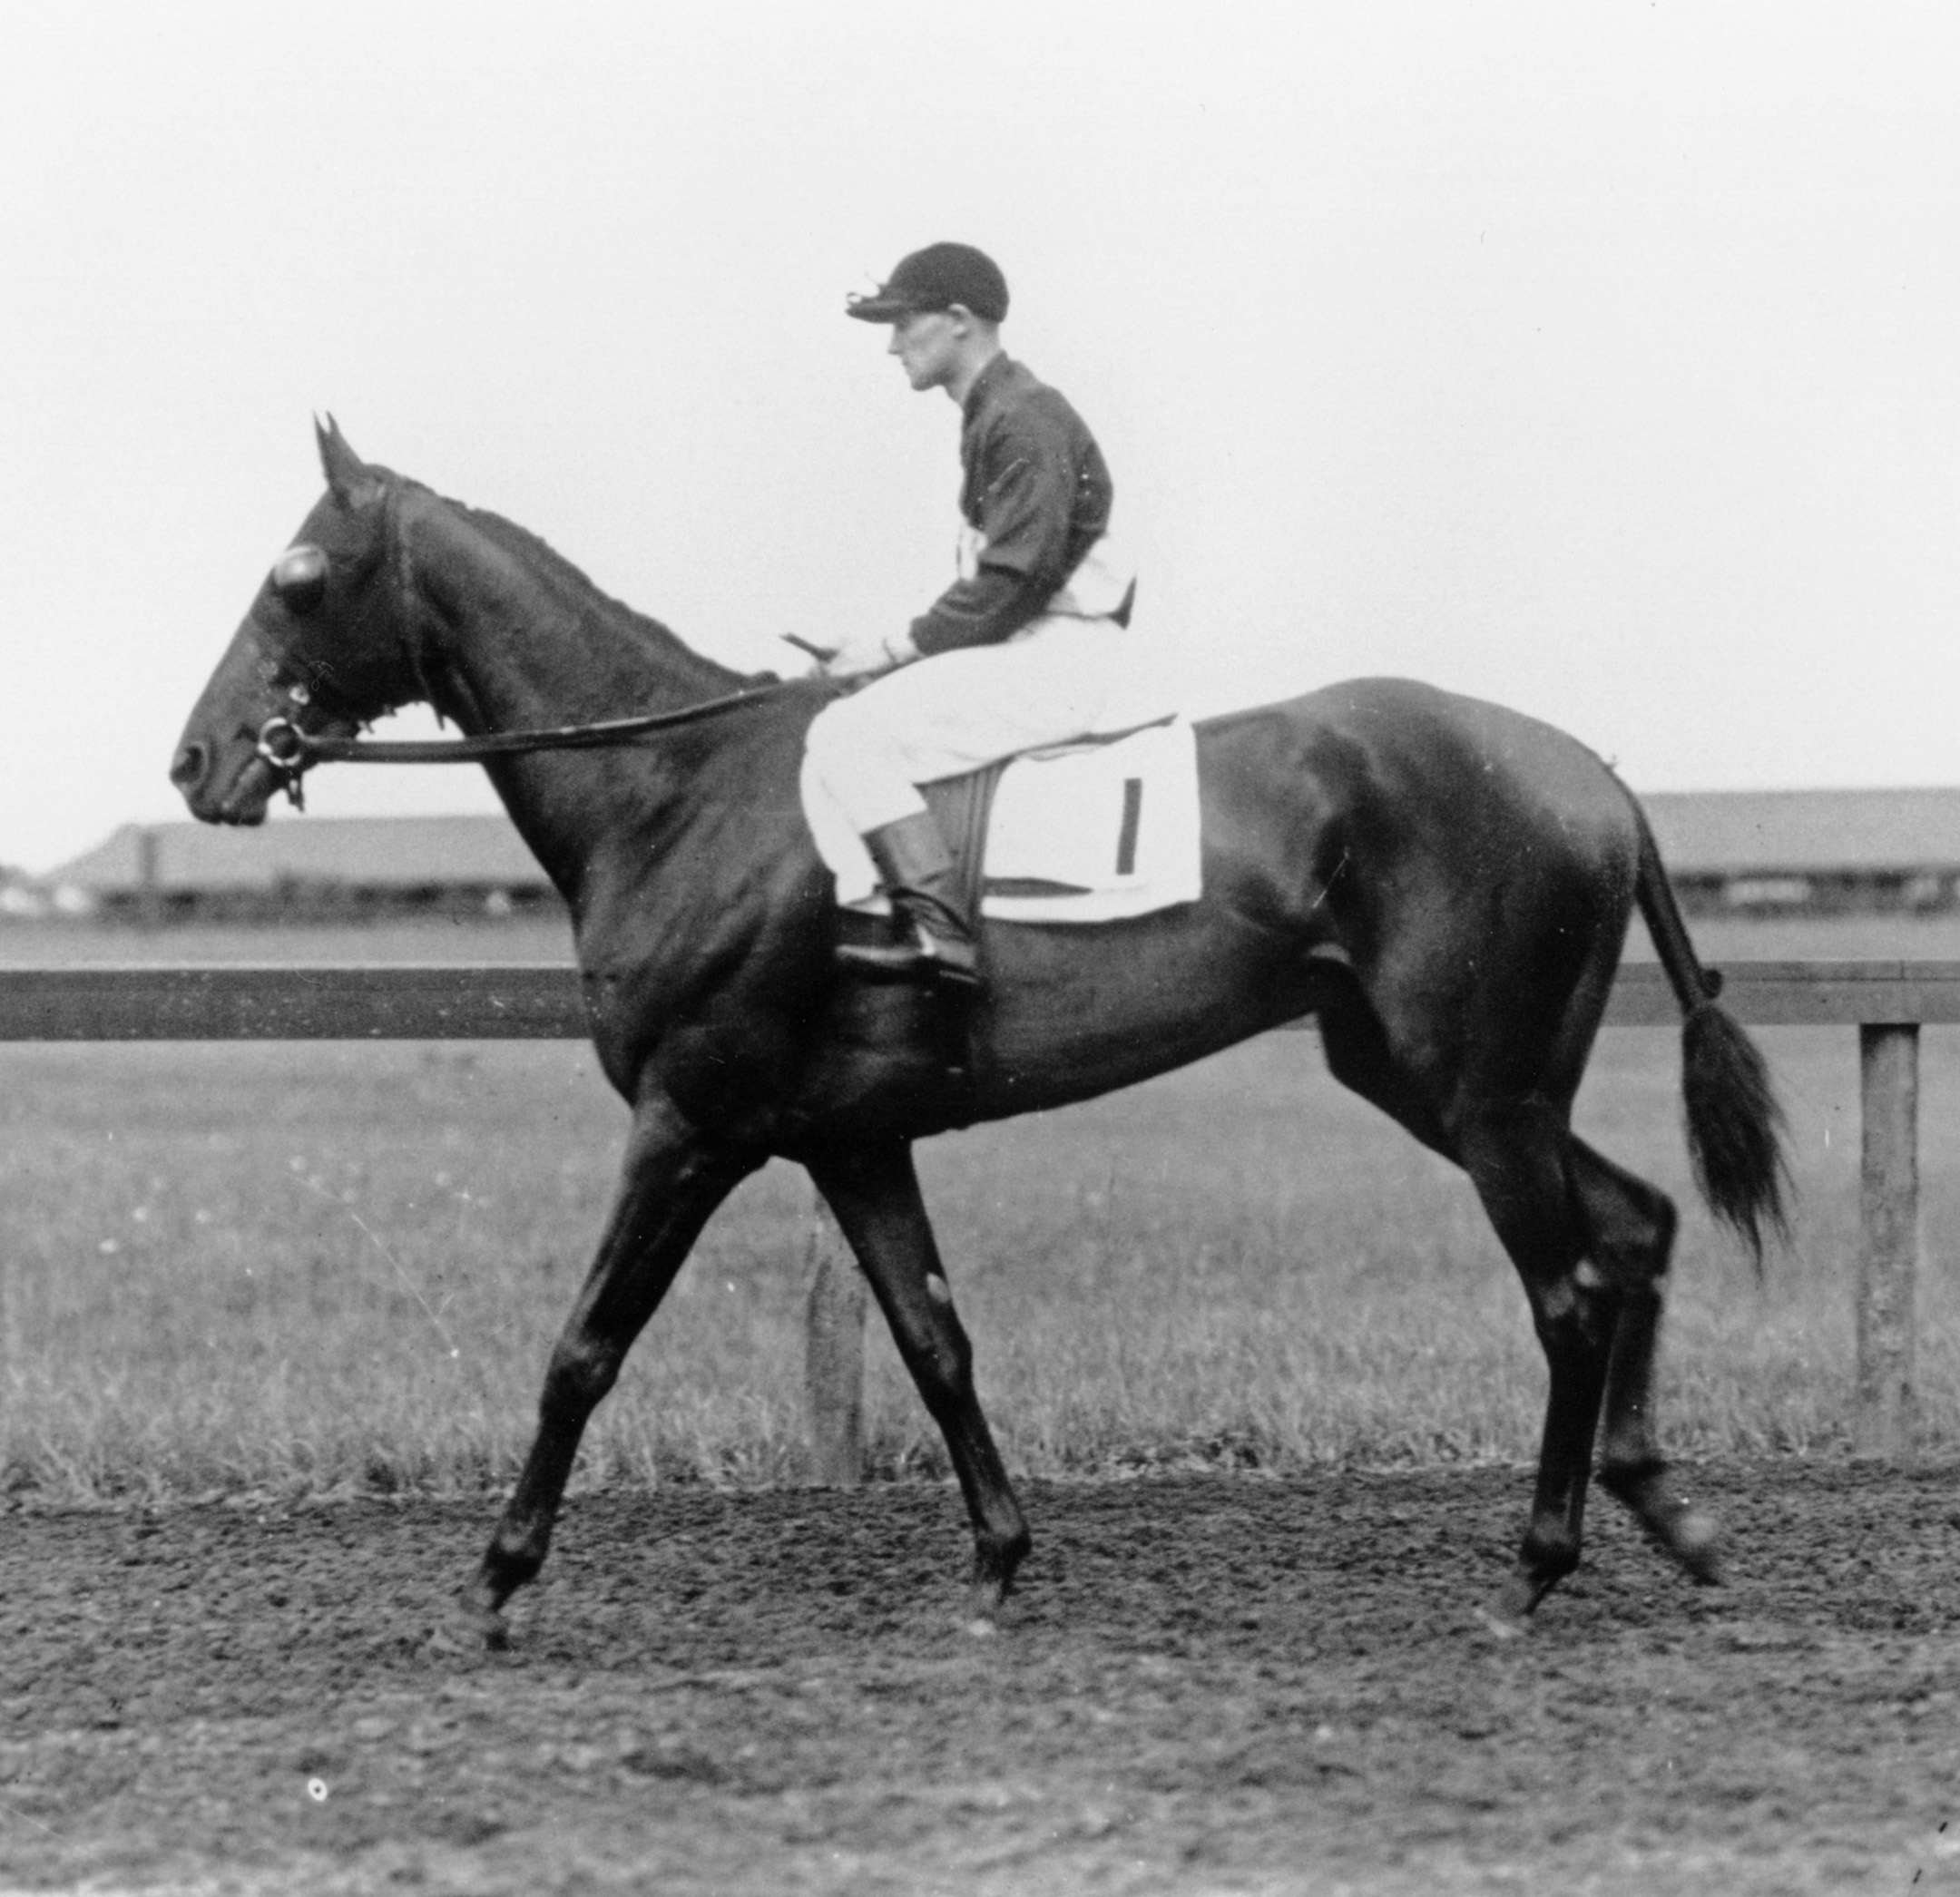 Roamer with James Butwell up (Keeneland Library Cook Collection/Museum Collection)